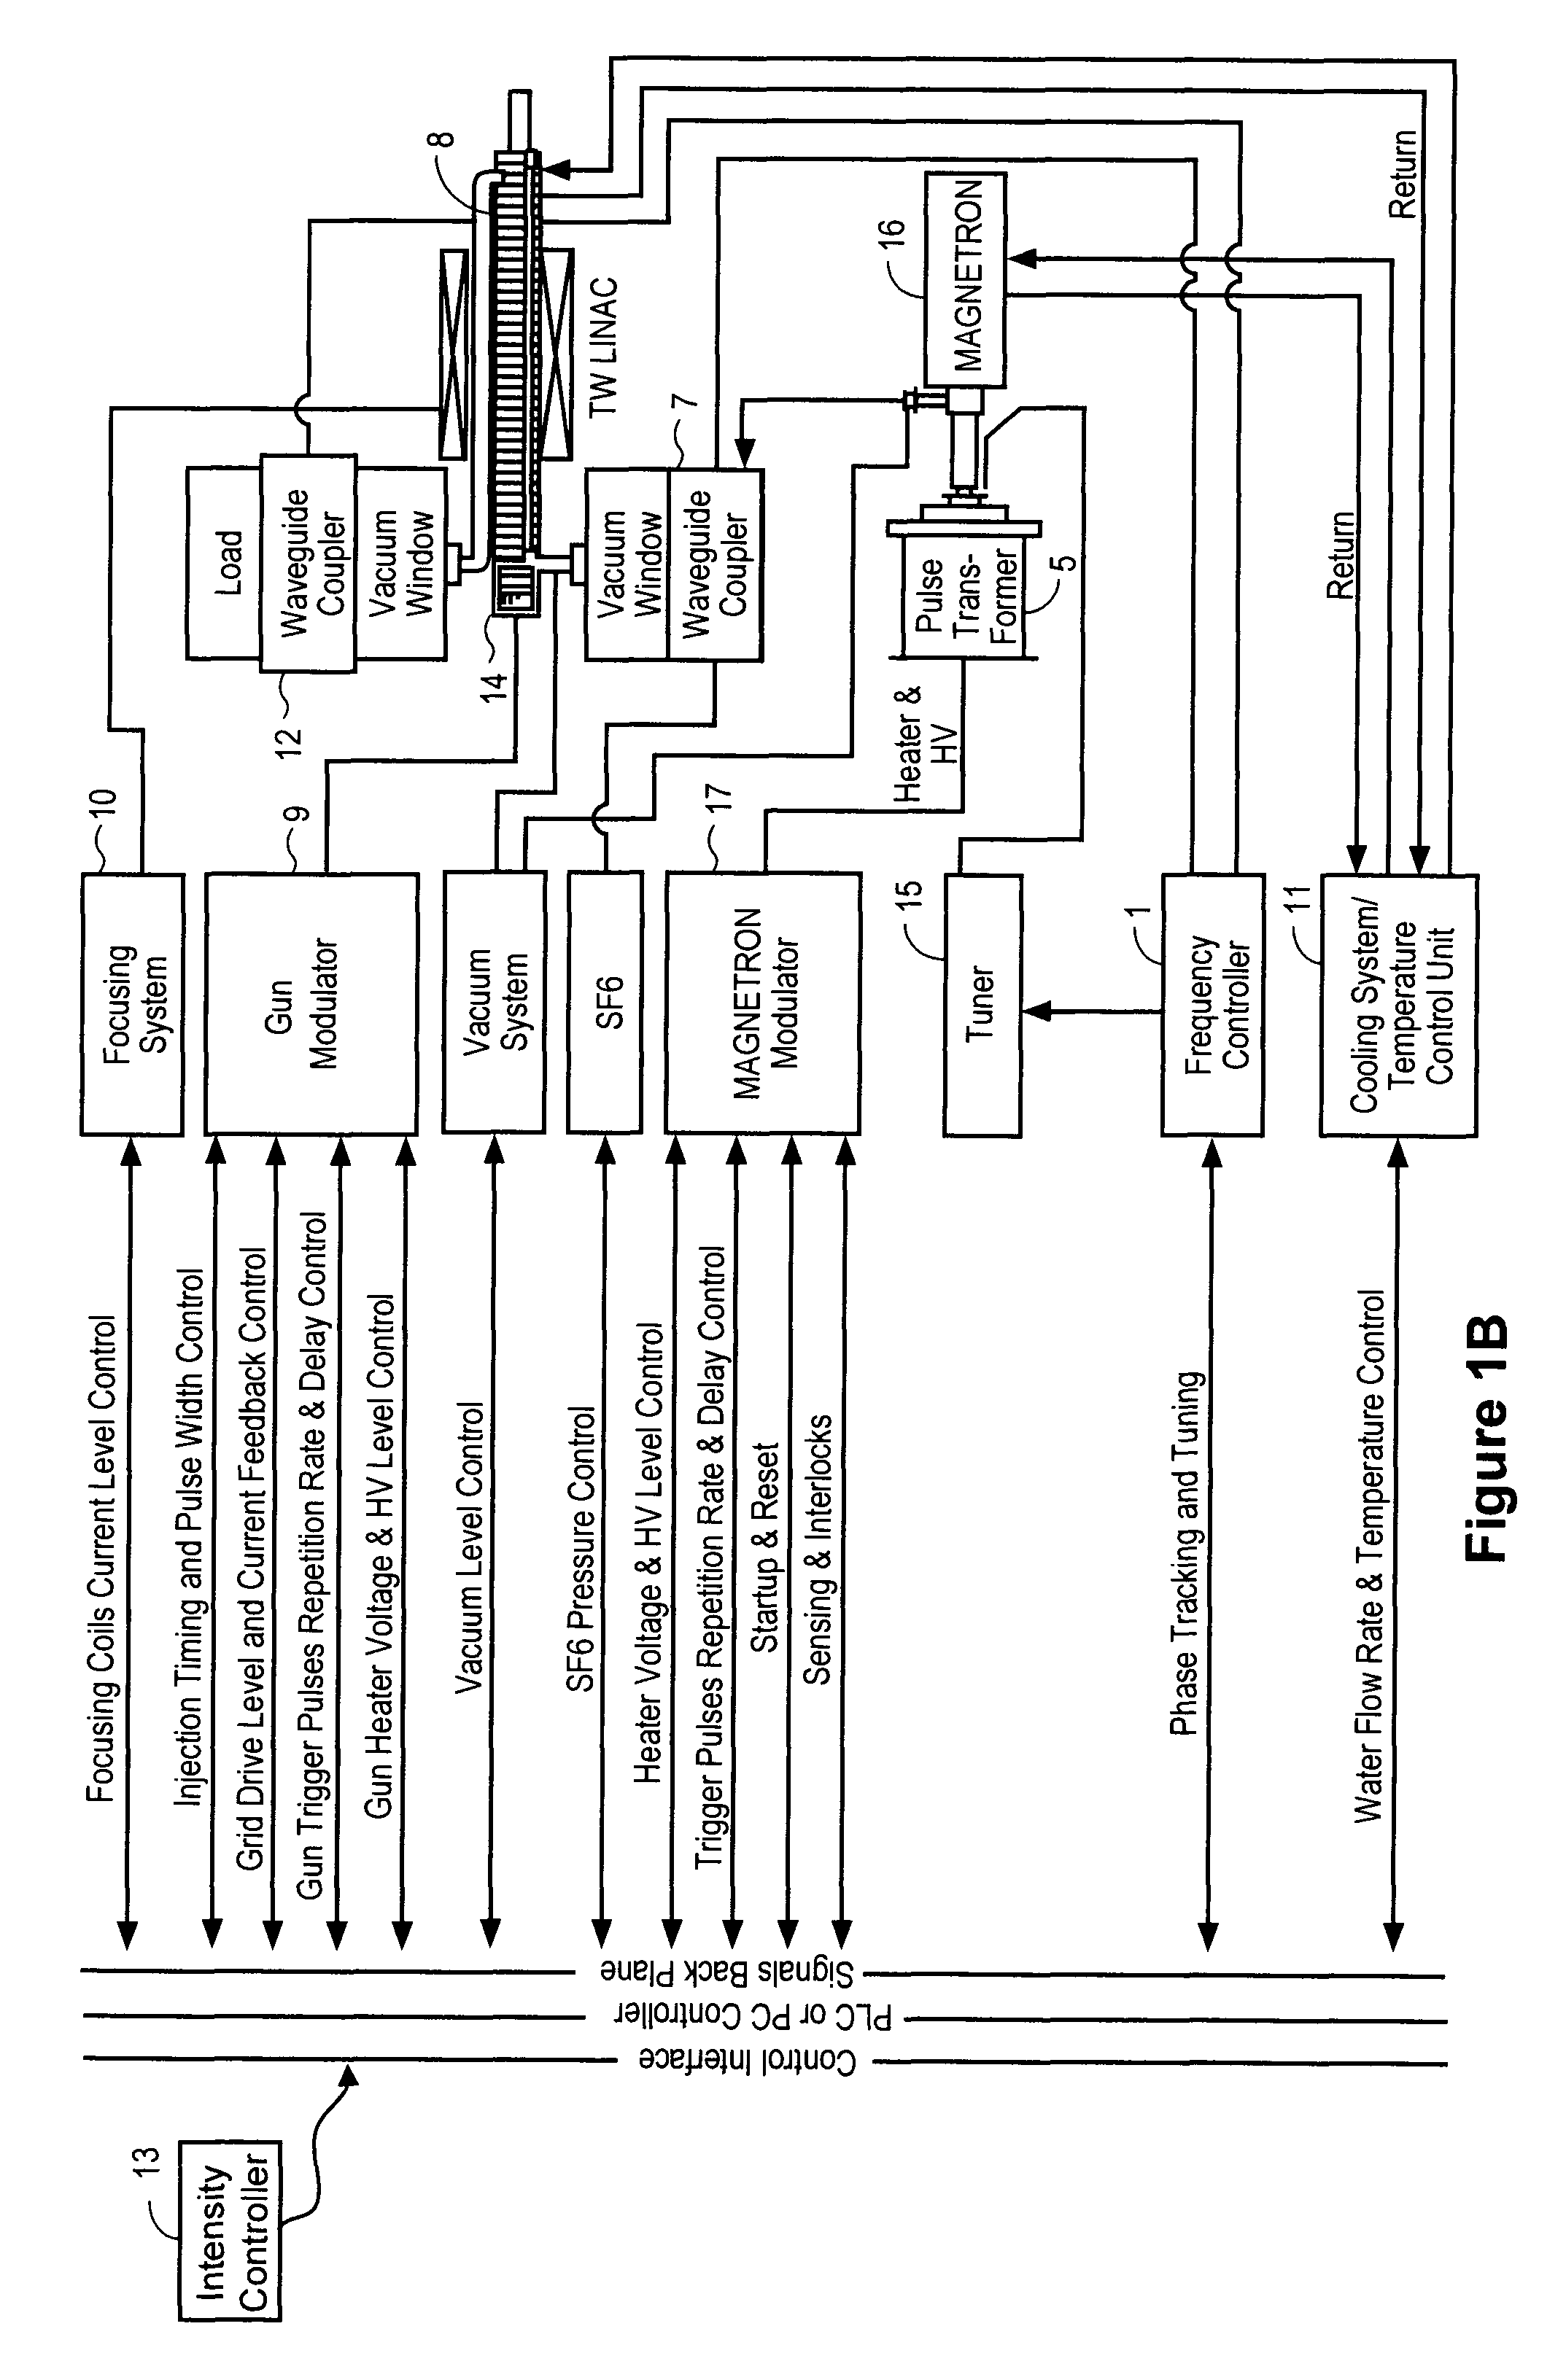 Systems and methods for cargo scanning and radiotherapy using a traveling wave linear accelerator based X-ray source using pulse width to modulate pulse-to-pulse dosage